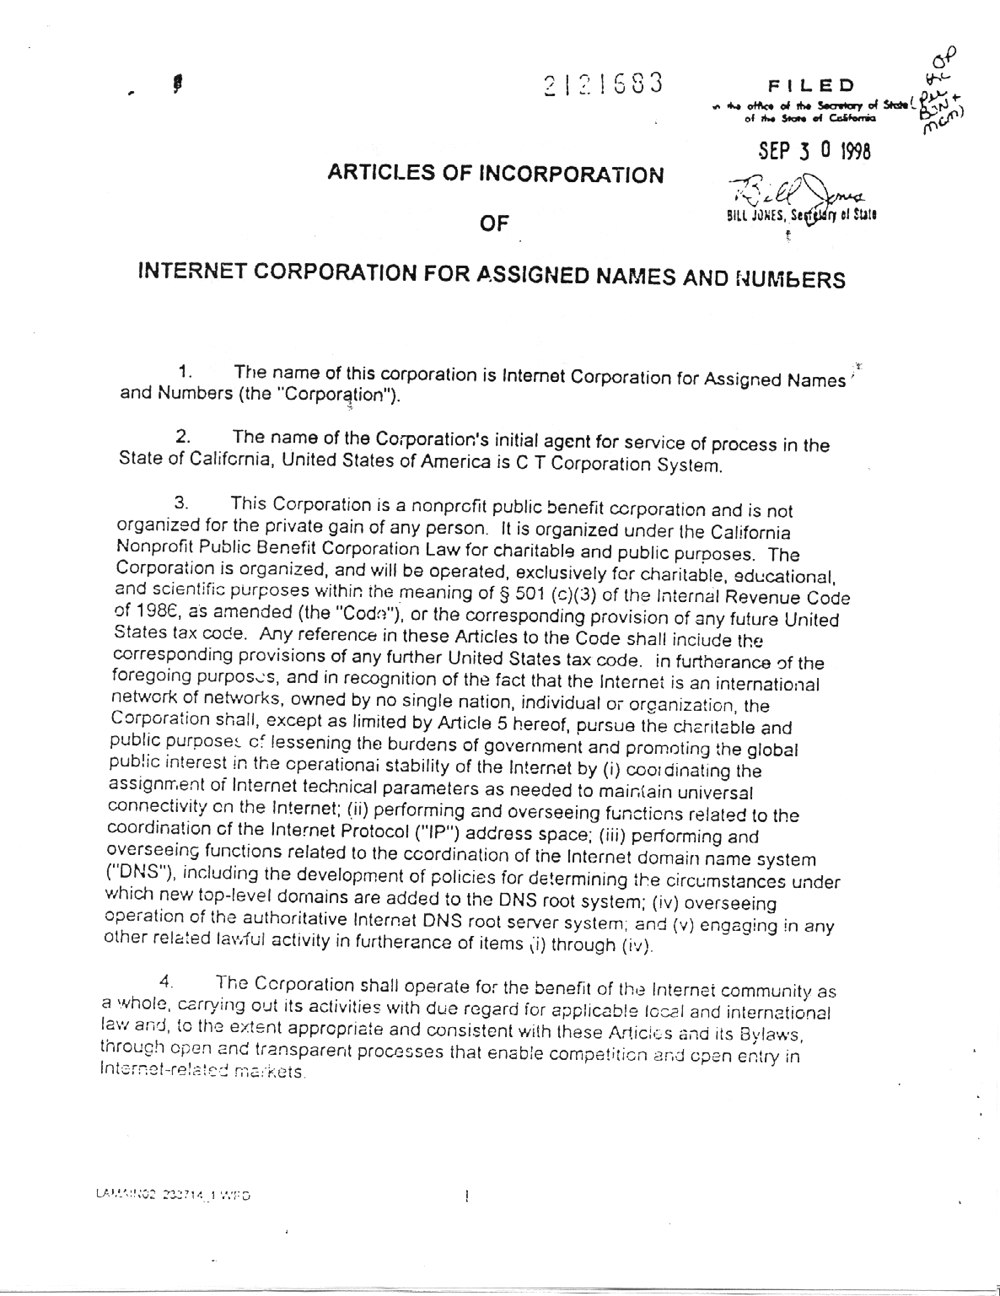 Articles of Incorporation of Internet Corporation for Assigned Names and Numbers, Page 1